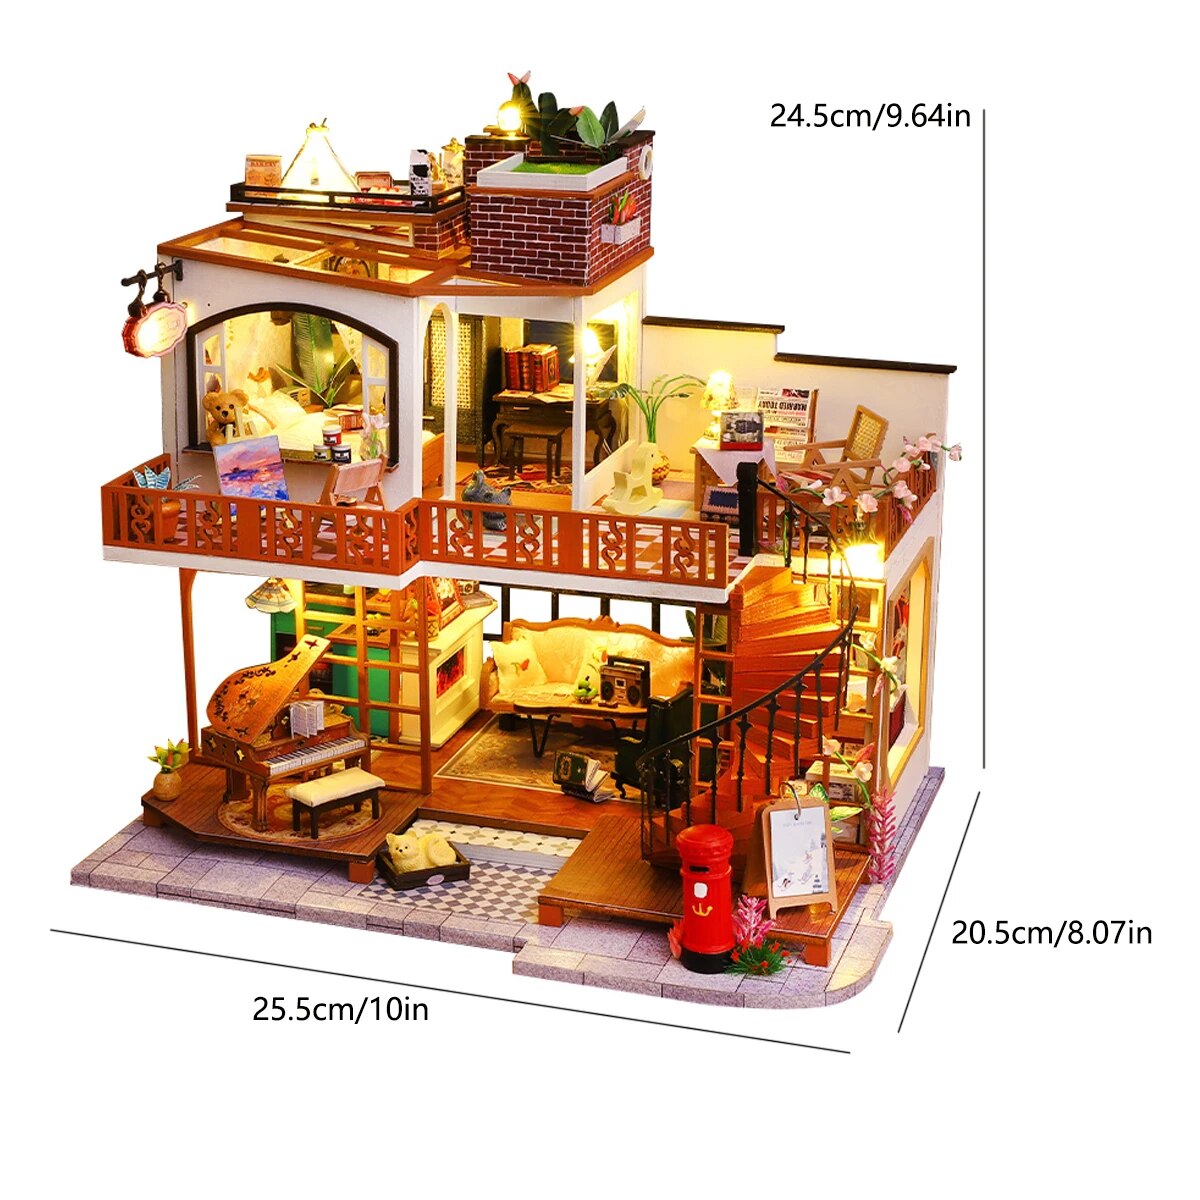 Baby House Kit Mini DIY Production 3D Puzzle Assembly Building Model Toys, Home Bedroom Decoration with Furniture Wooden Crafts ShopOnlyDeal